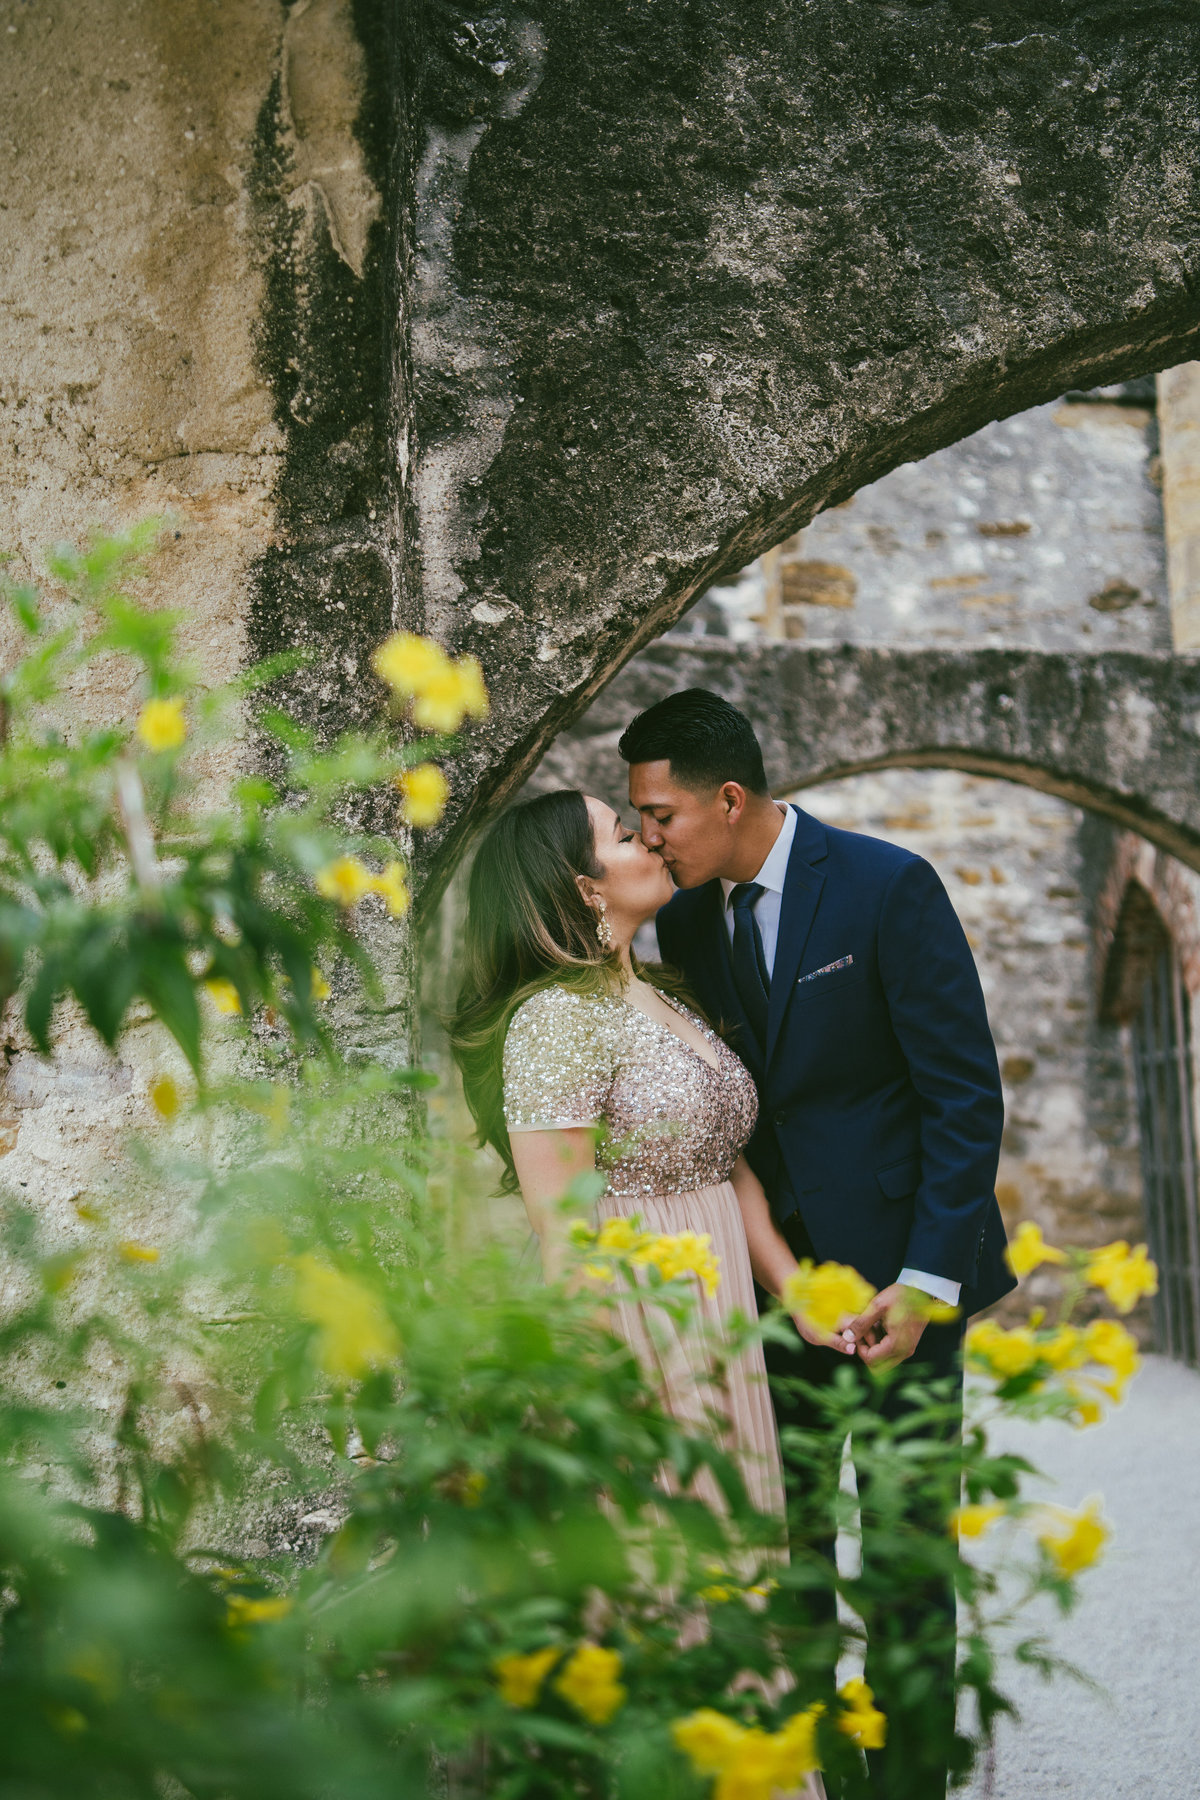 Engaged man and woman kissing behind yellow flowers and under an arch at Mission San Jose in San Antonio, Texas.